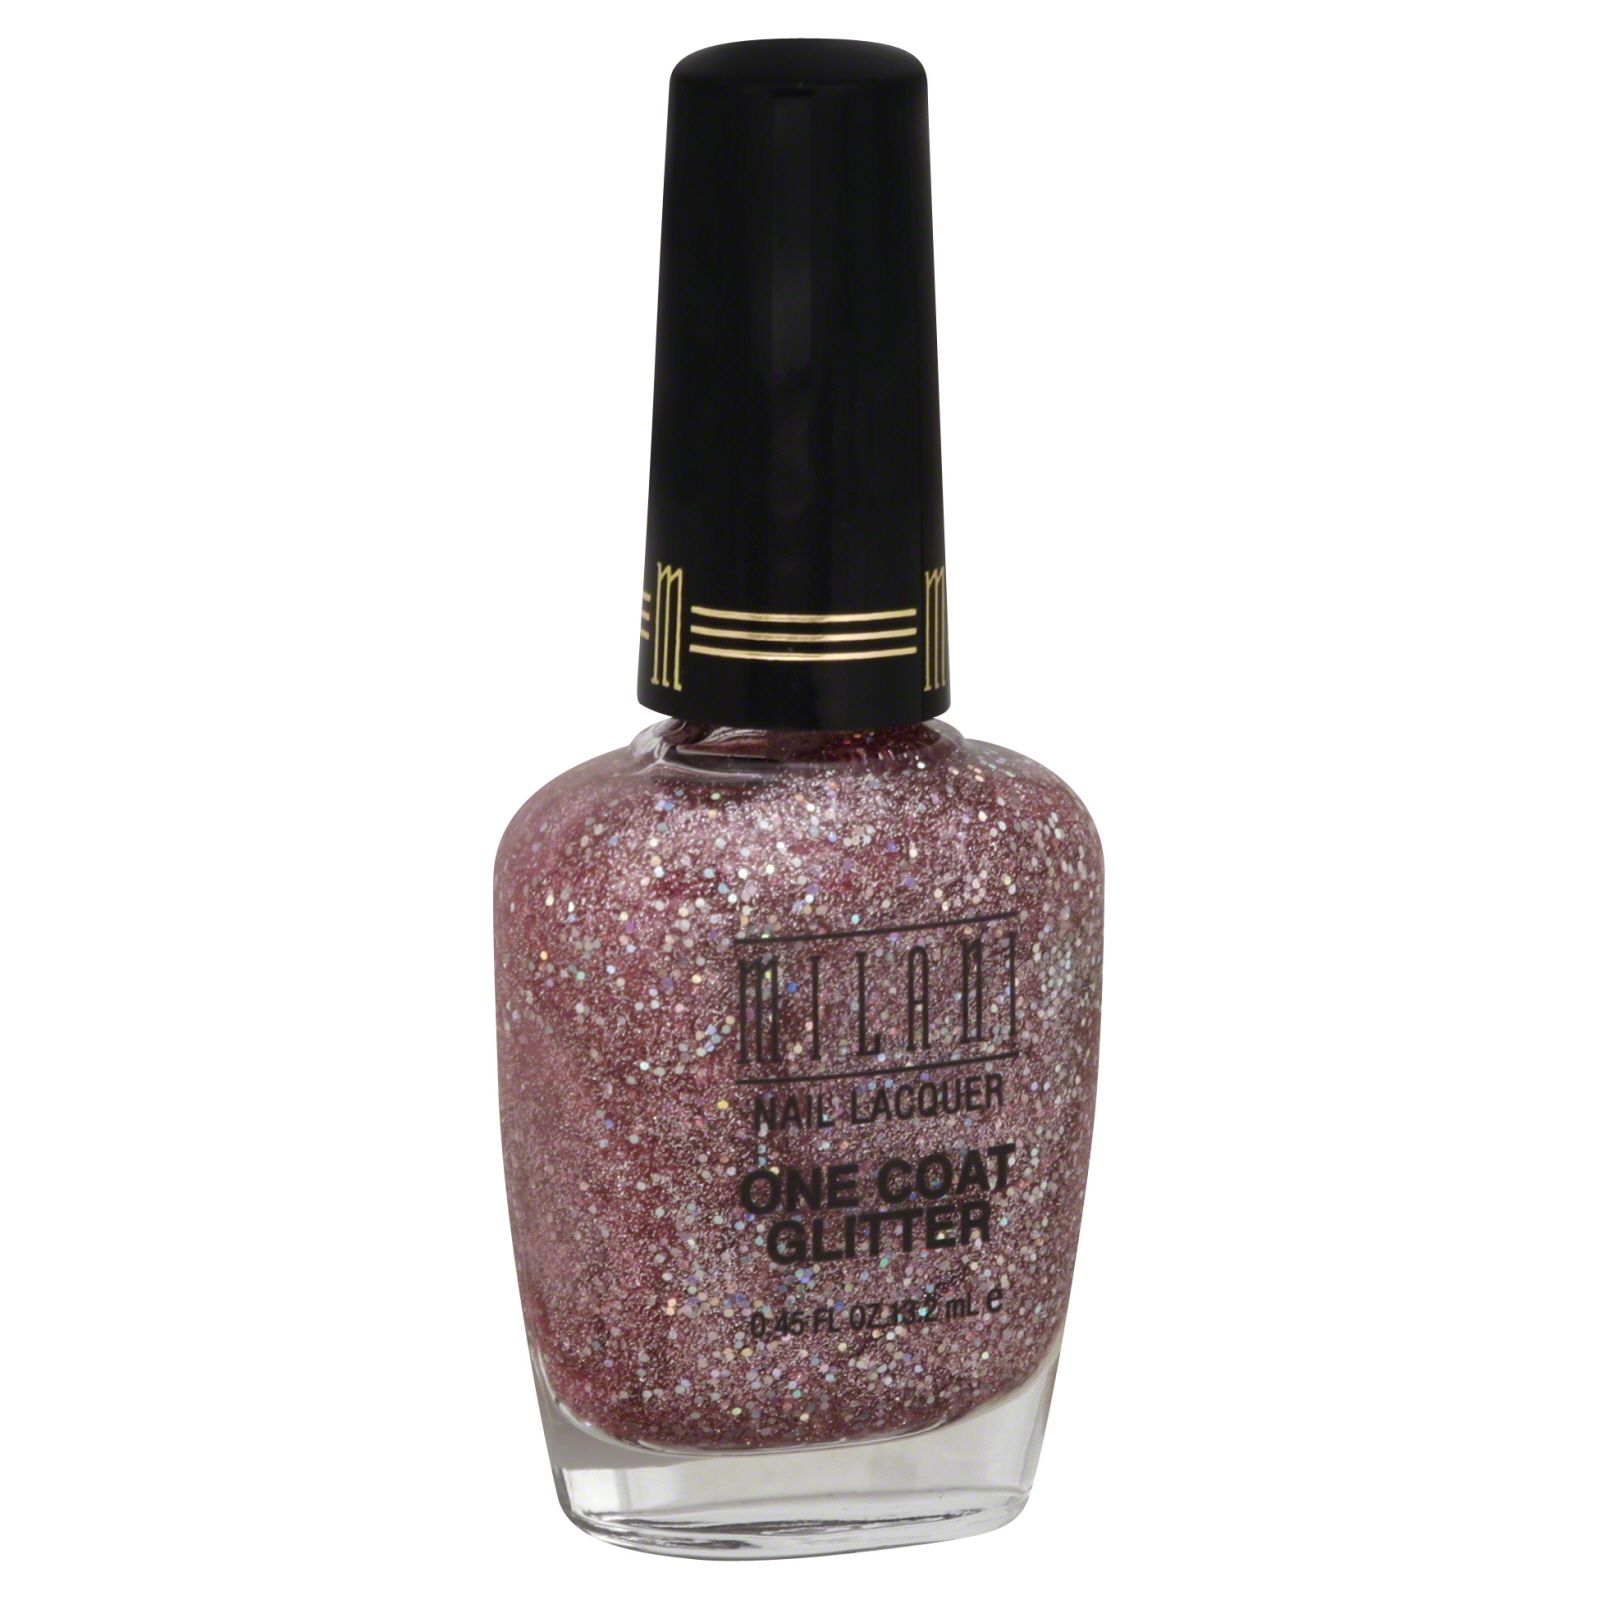 Milani Specialty Nail Lacquer - 1 Coat Glitters